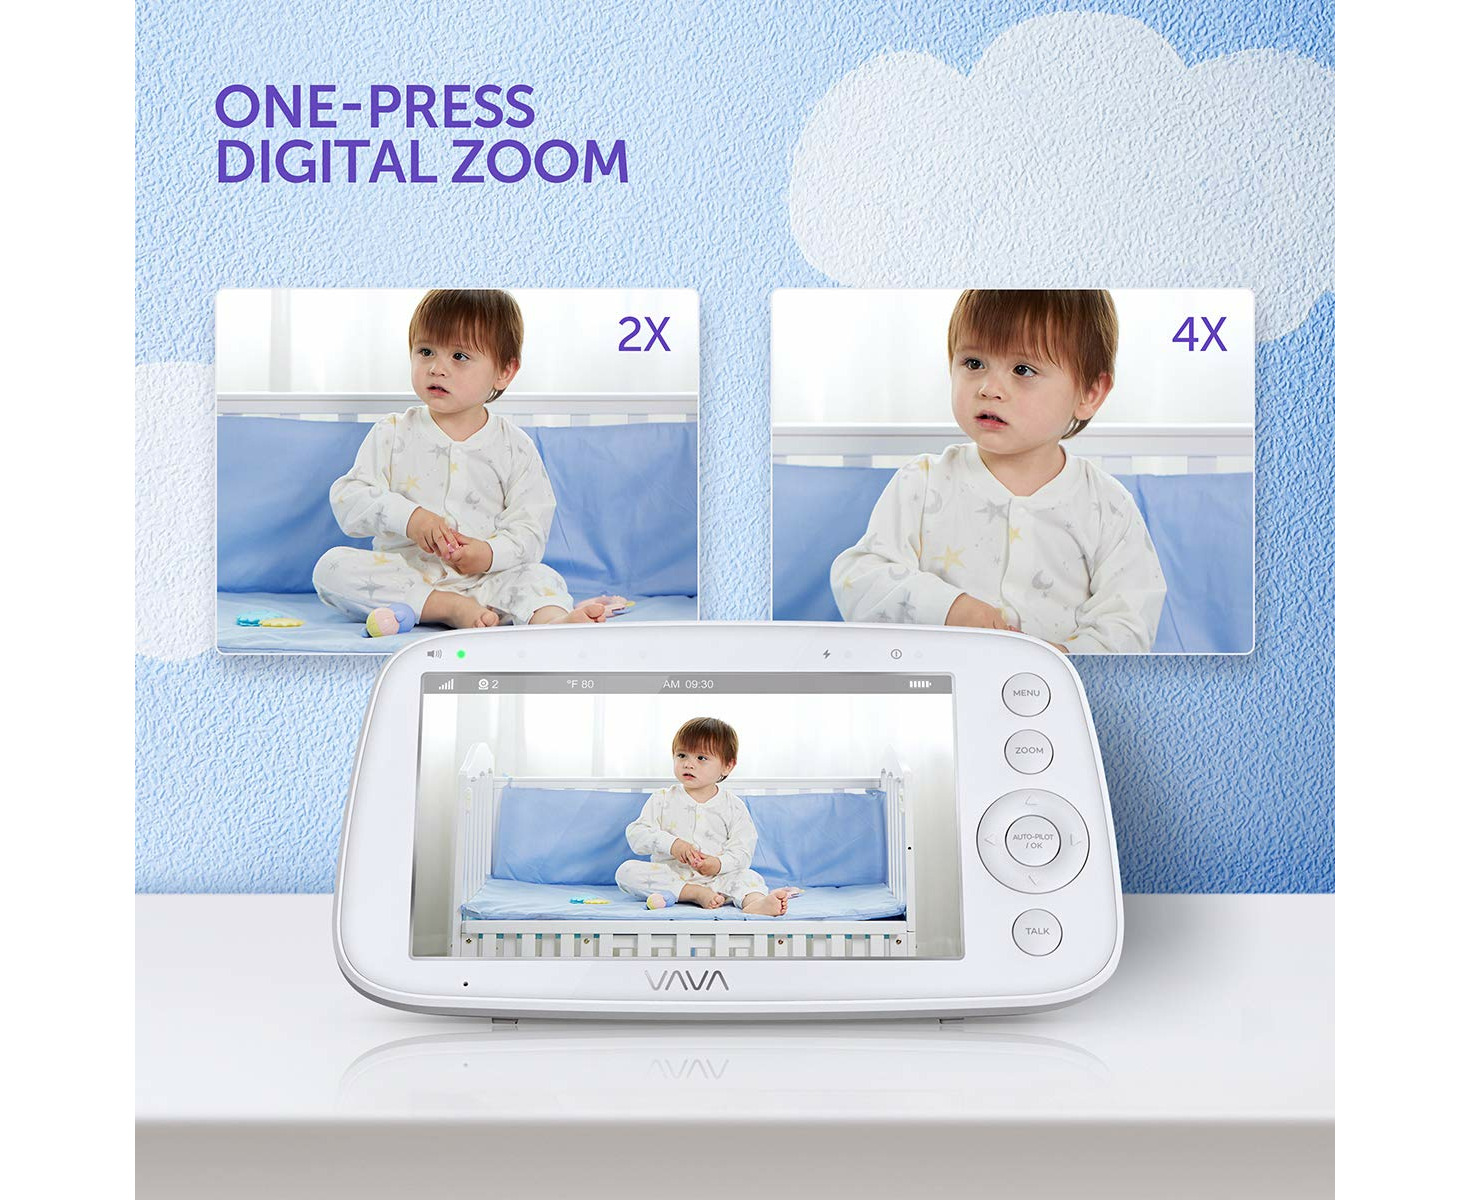 Vava Split View 5 720p Video Baby Monitor With 2 Cameras : Target